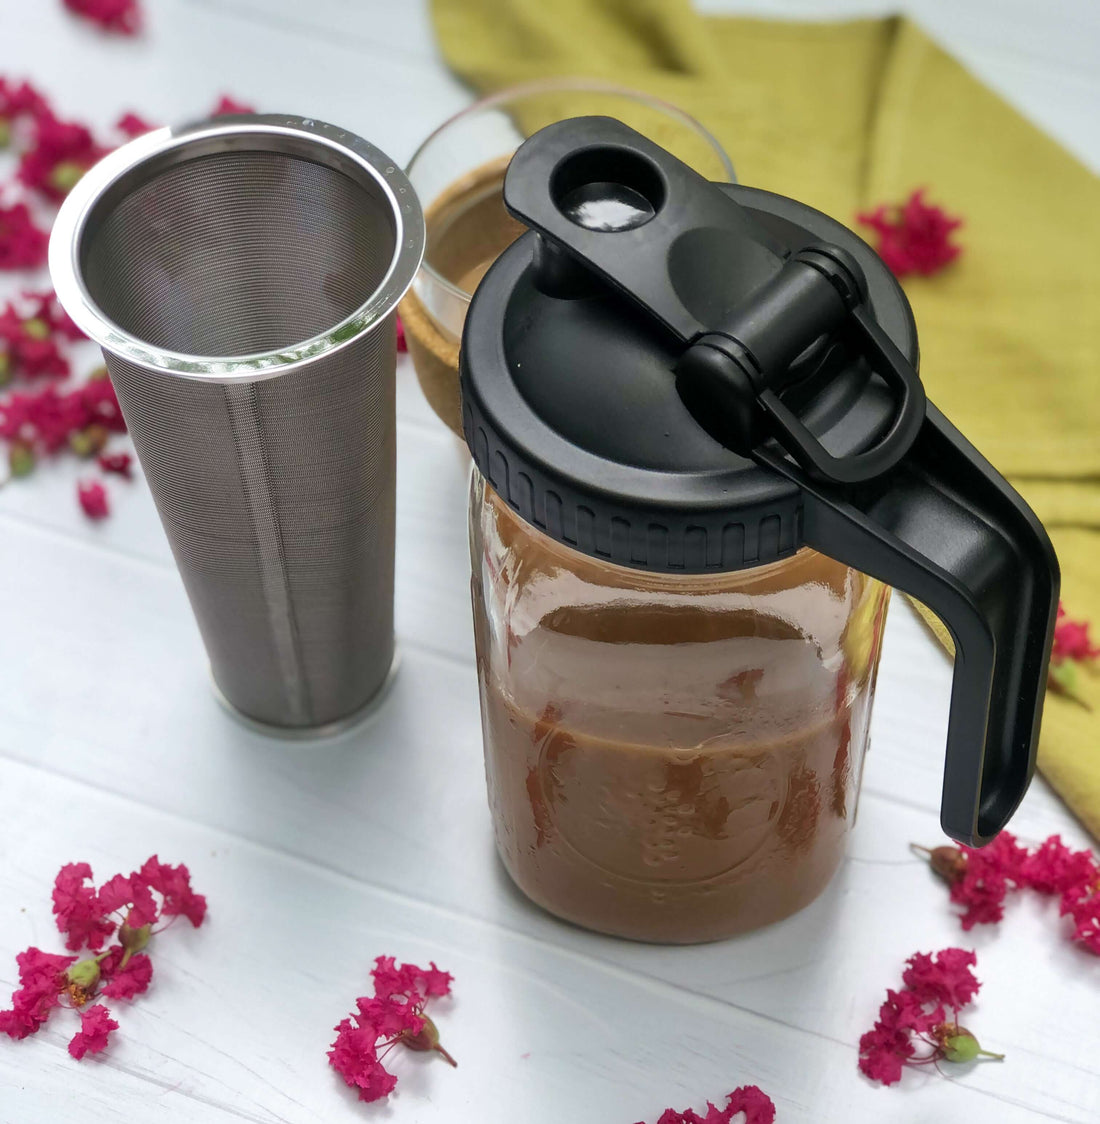 1L Cold Brew Cup with Filter Ring Handle Hand-brewed Coffee Hand-ground  Filter Cup Fine Mesh Strainer Dripping Coffee Maker